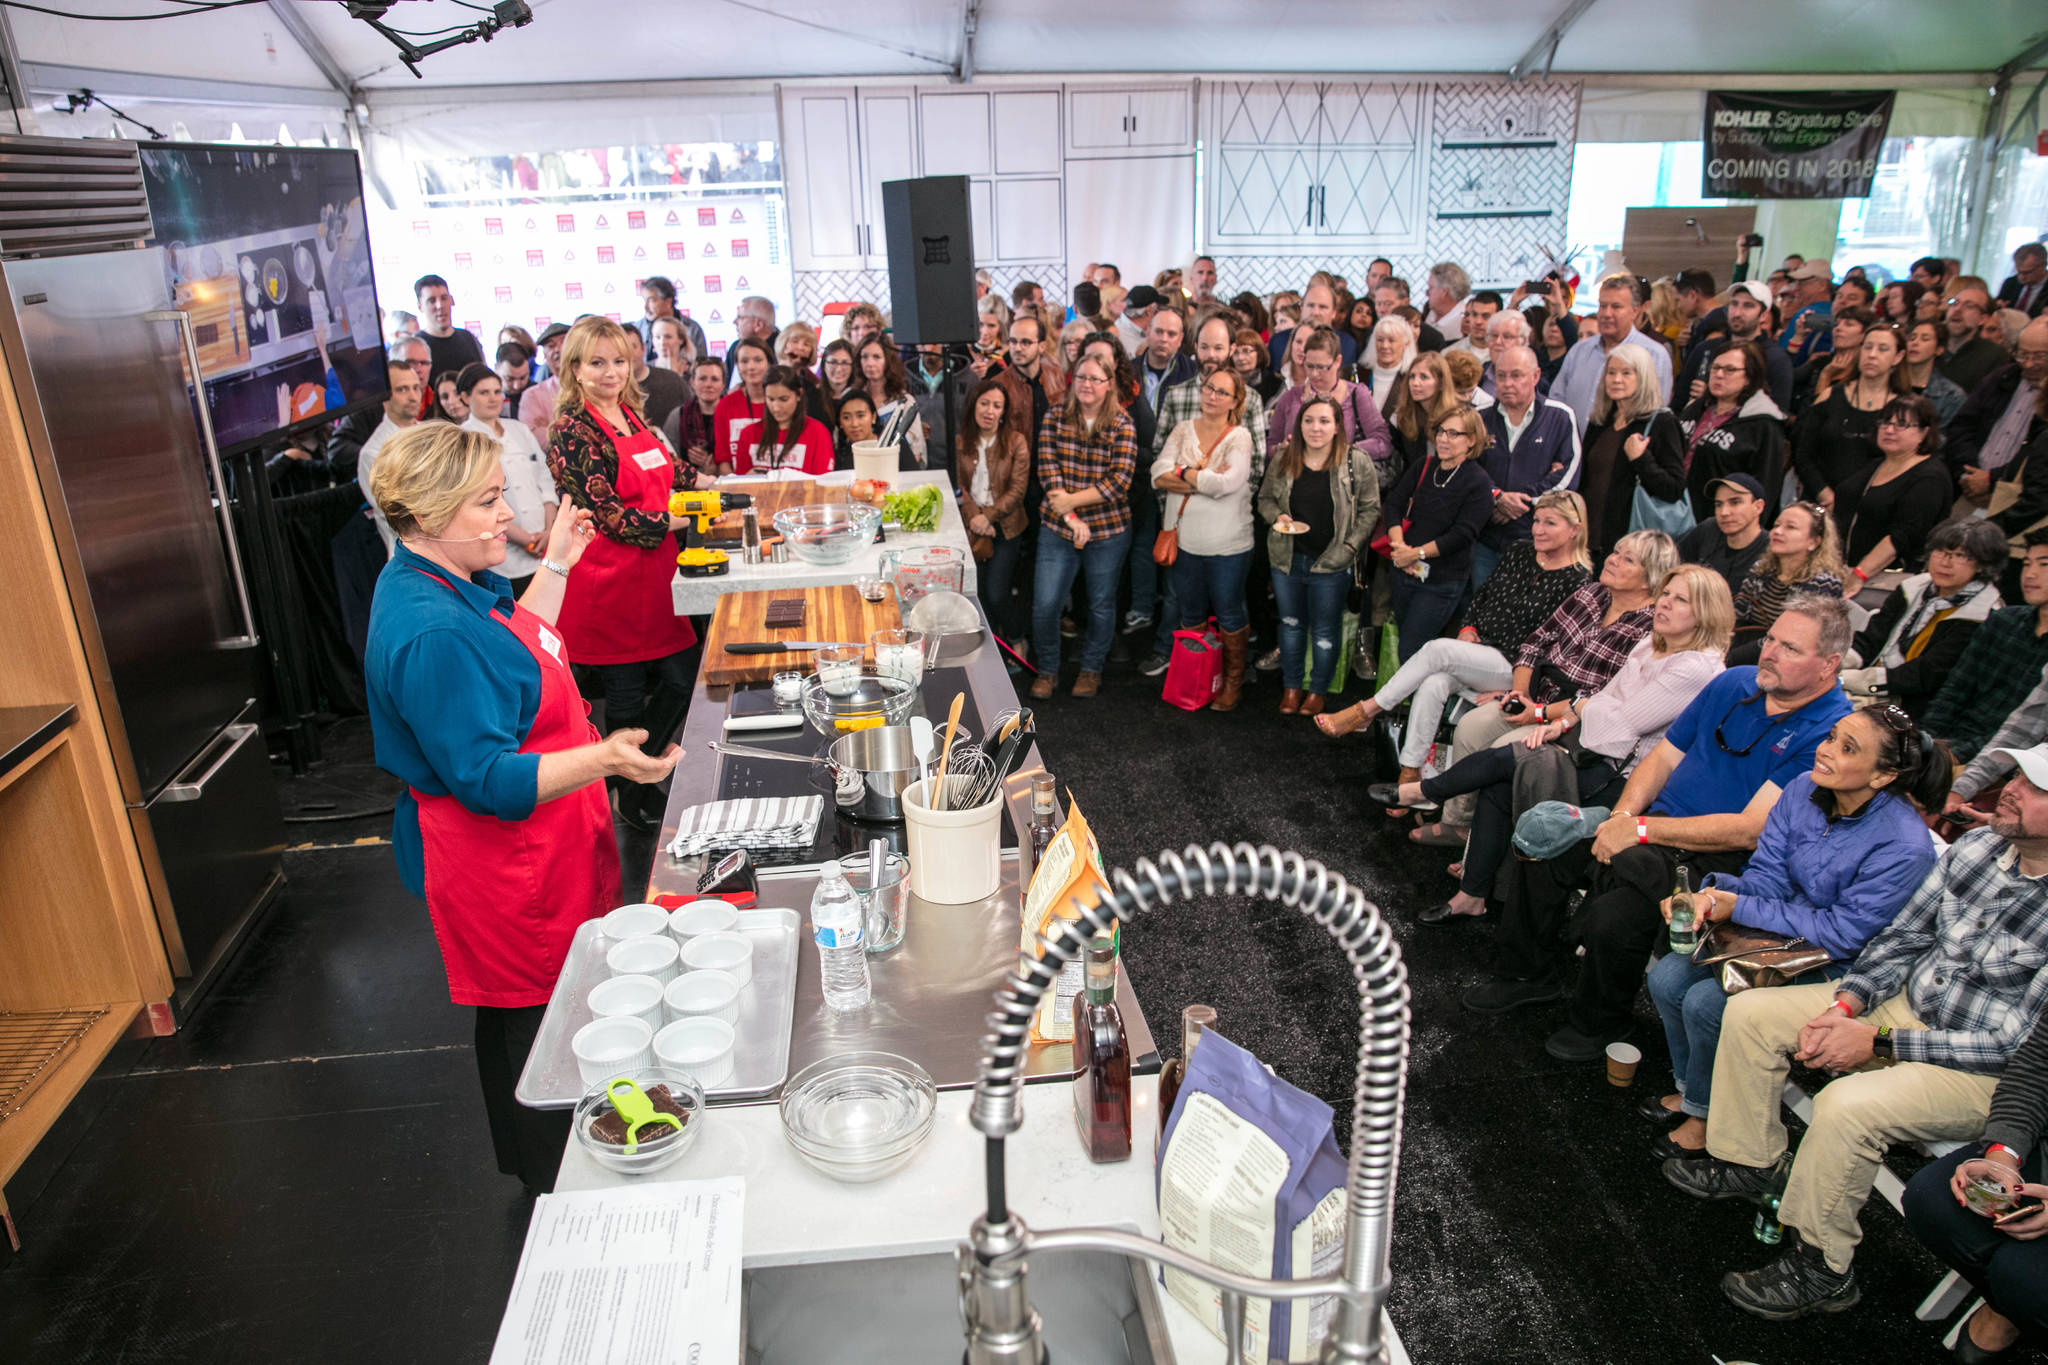 The culinary thrills of the PBS favorite come to life during &lt;em&gt;America’s Test Kitchen&lt;/em&gt;’s live events. Photo courtesy America’s Test Kitchen